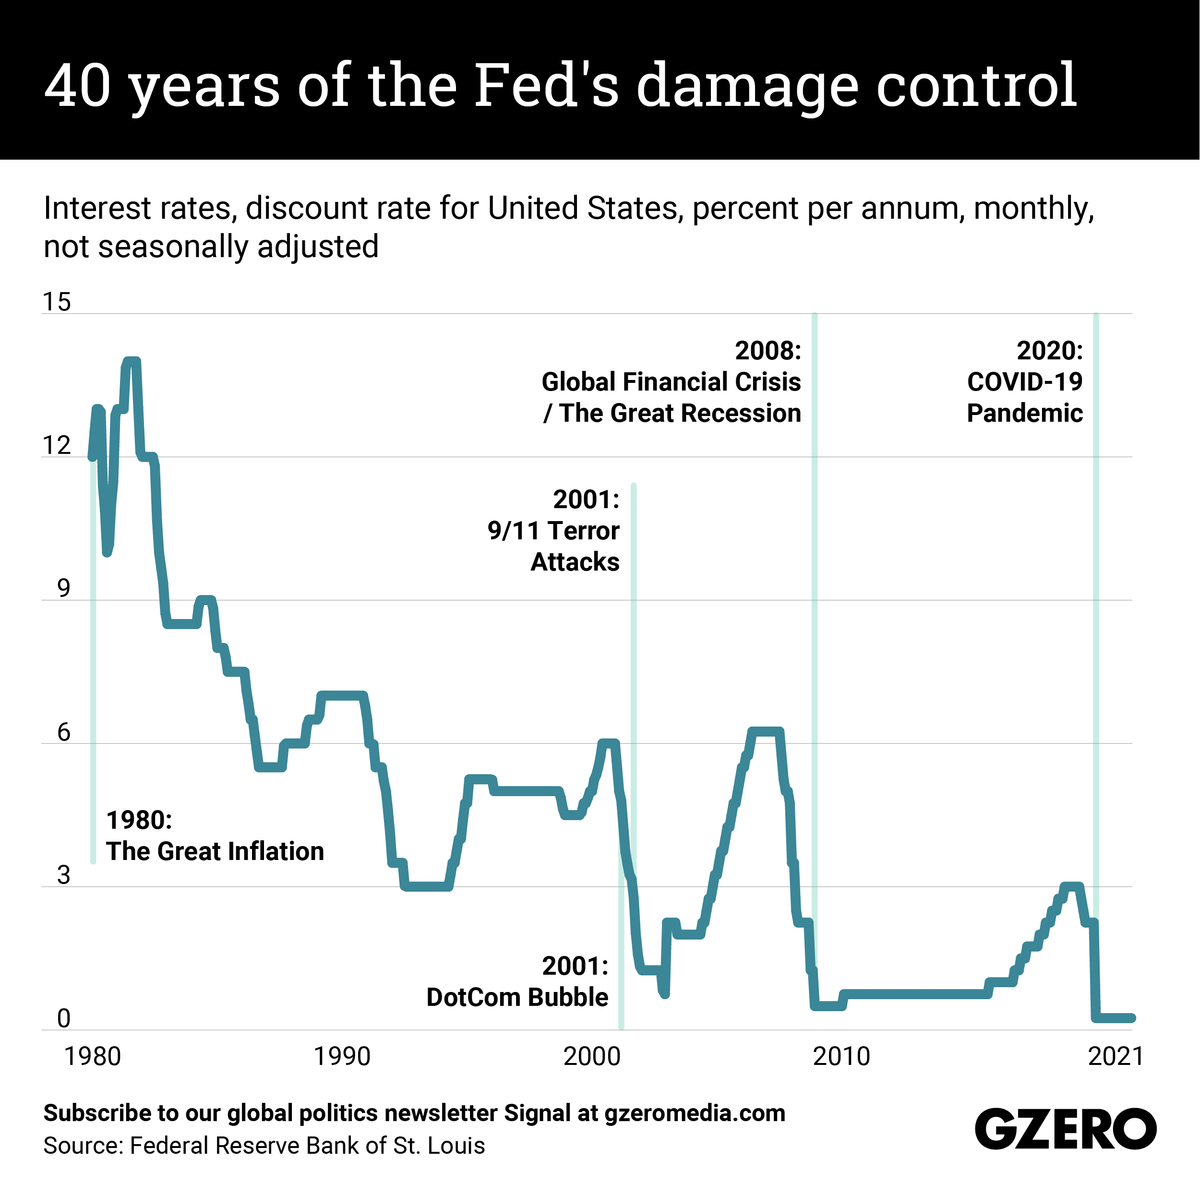 The Graphic Truth: 40 years of the Fed's damage control